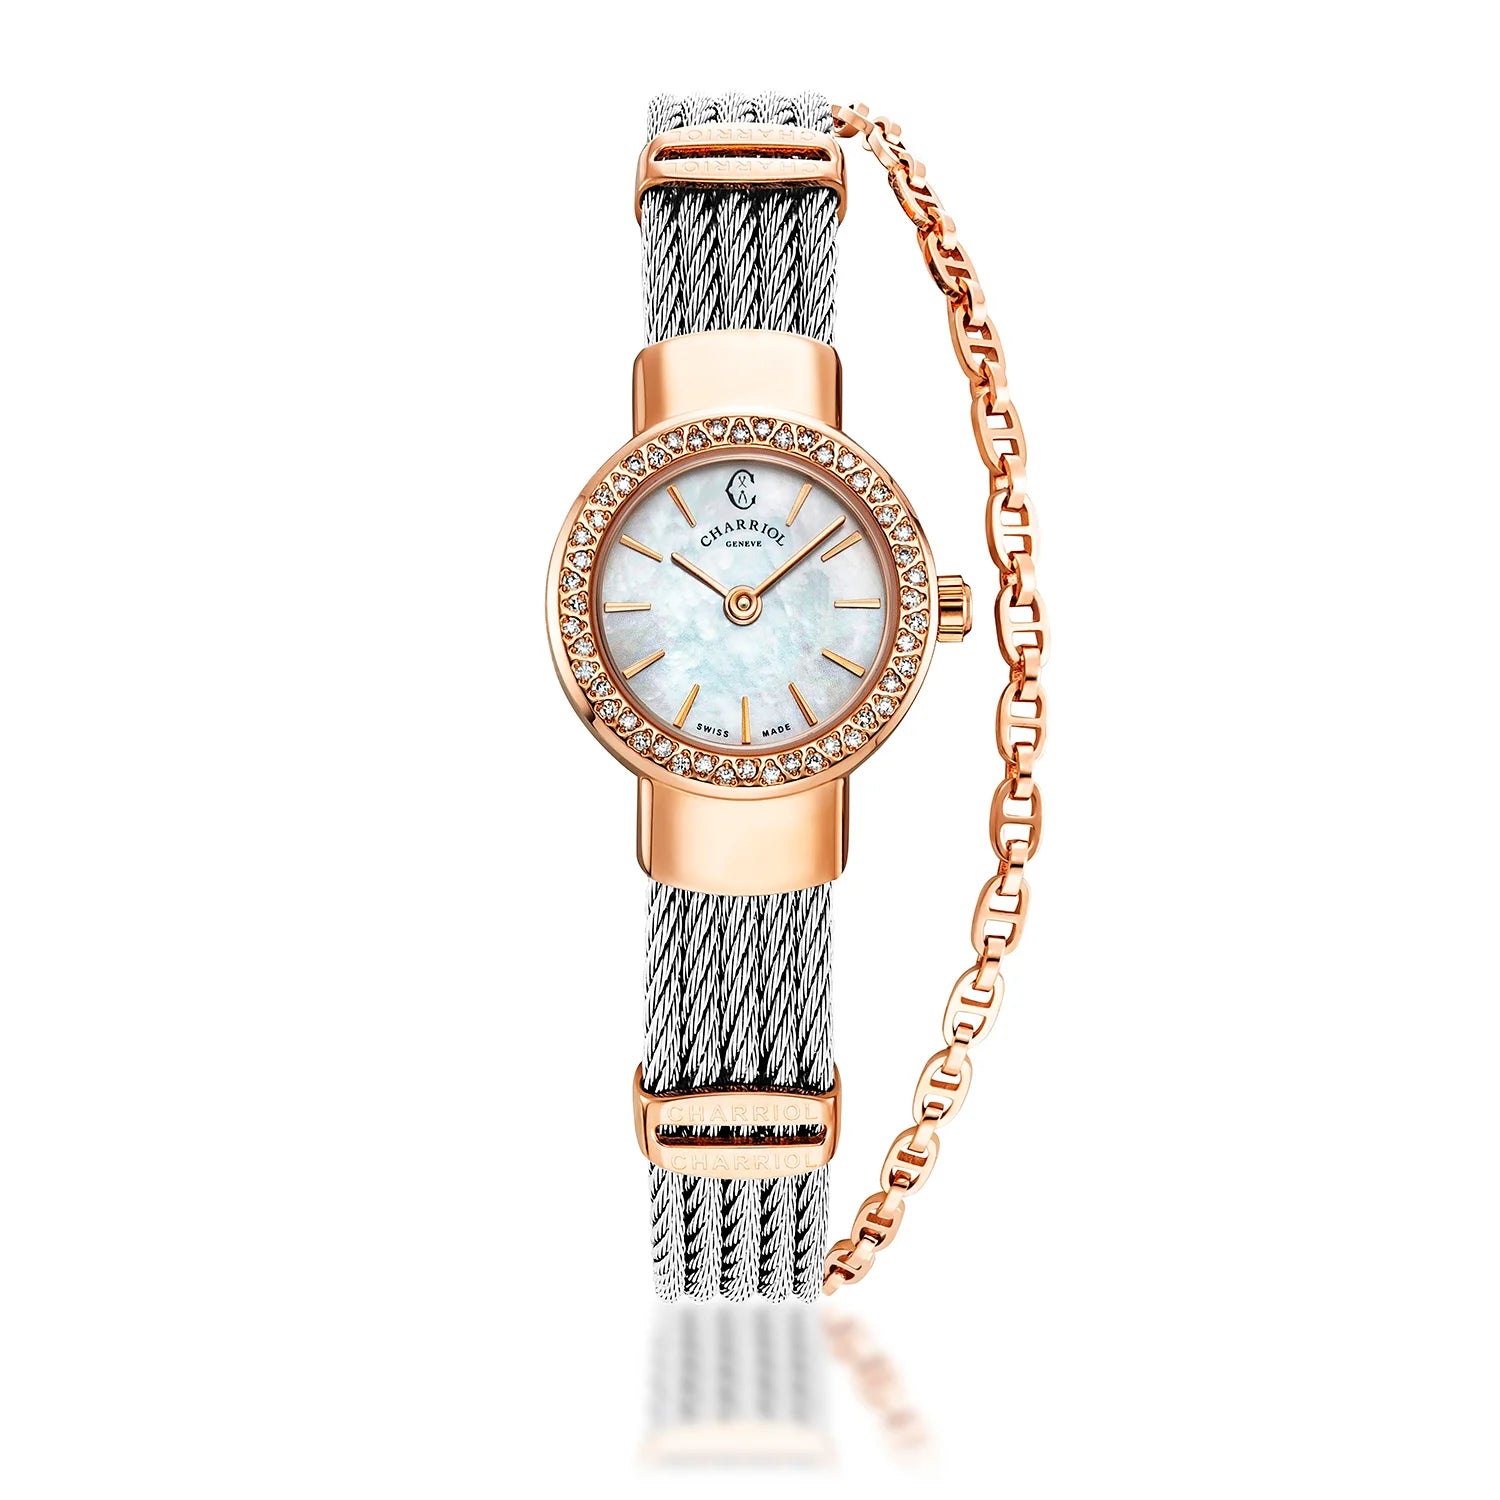 St Tropez Icon 20mm Watch Rose Gold PVD, Steel Cable, 48 Diamonds Bezel and White MOP Dial - Charriol Geneve -  Watch